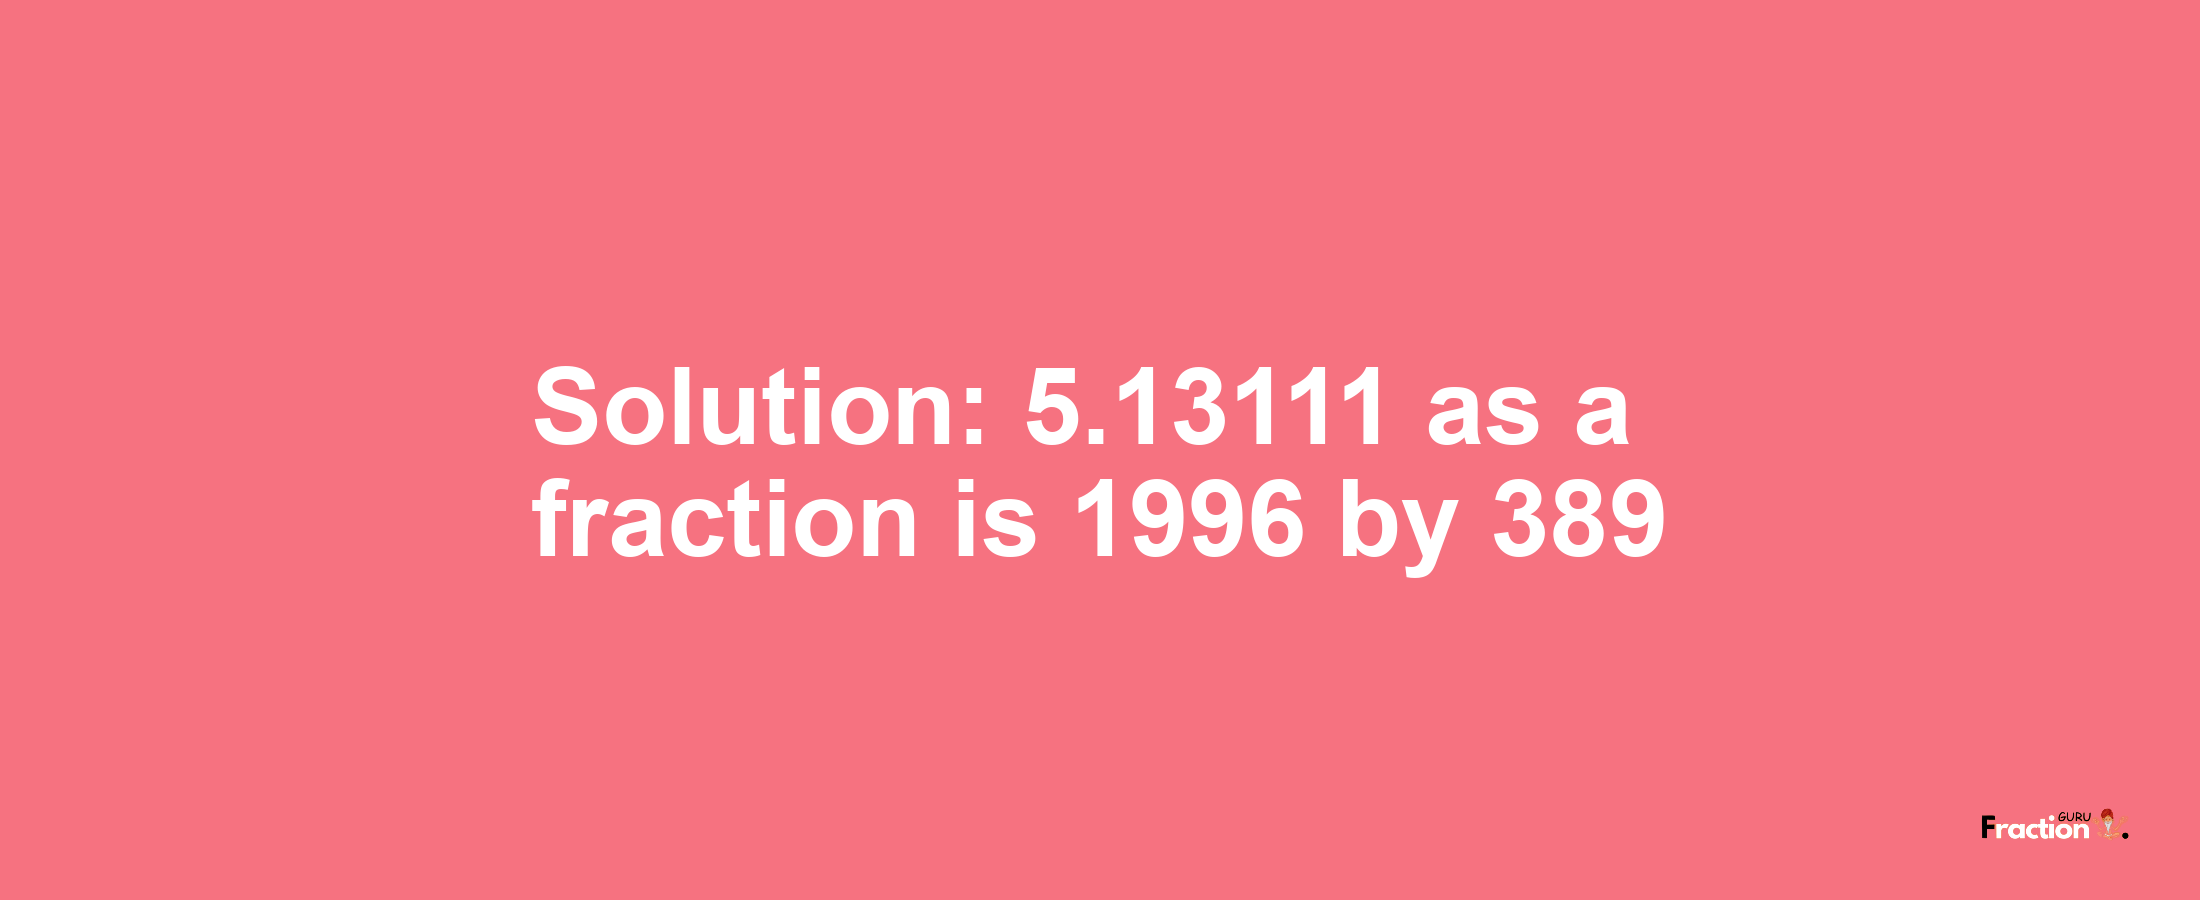 Solution:5.13111 as a fraction is 1996/389